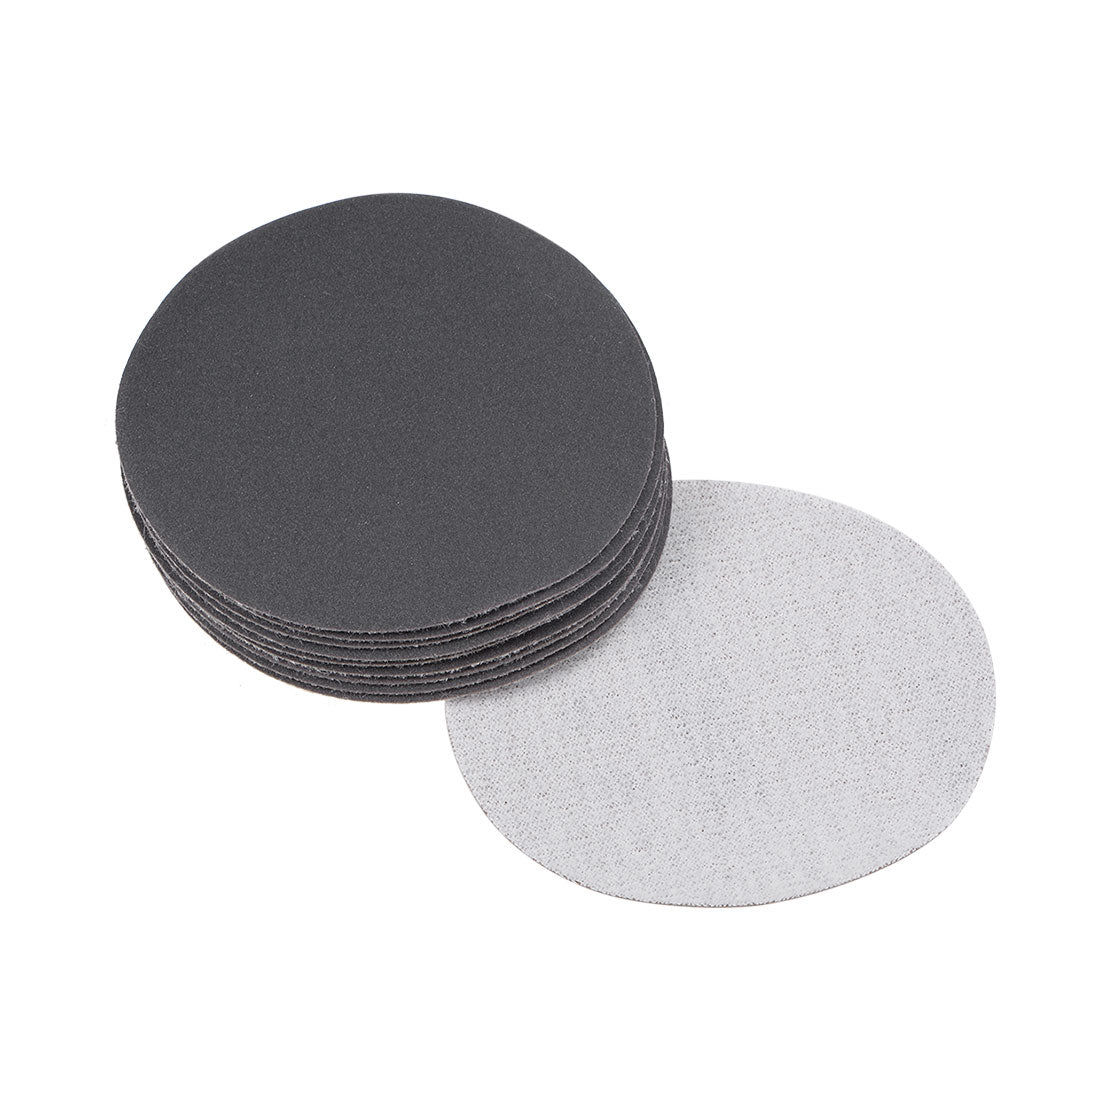 uxcell Uxcell Wet Dry Disc Hook and Loop Sandpaper Disc Silicon Carbide Tools